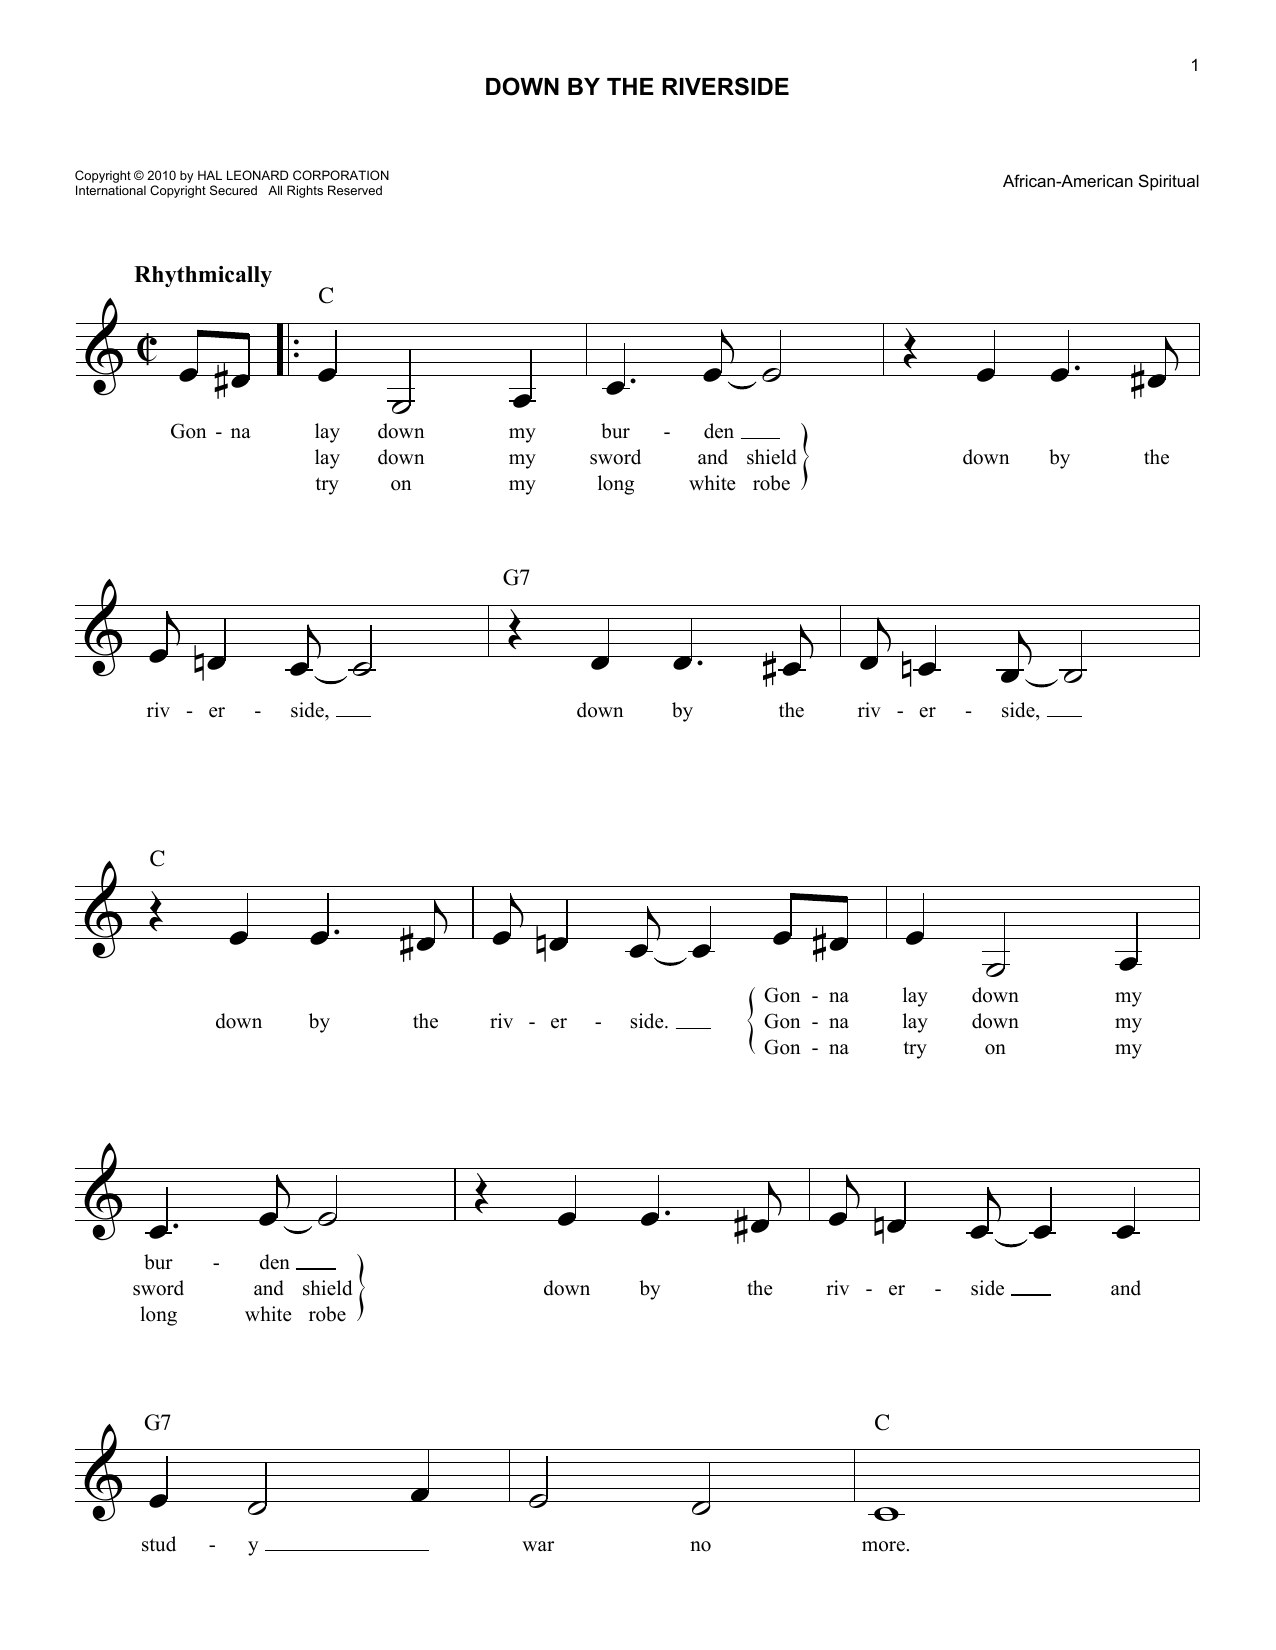 African American Spiritual Down By The Riverside sheet music notes and chords. Download Printable PDF.